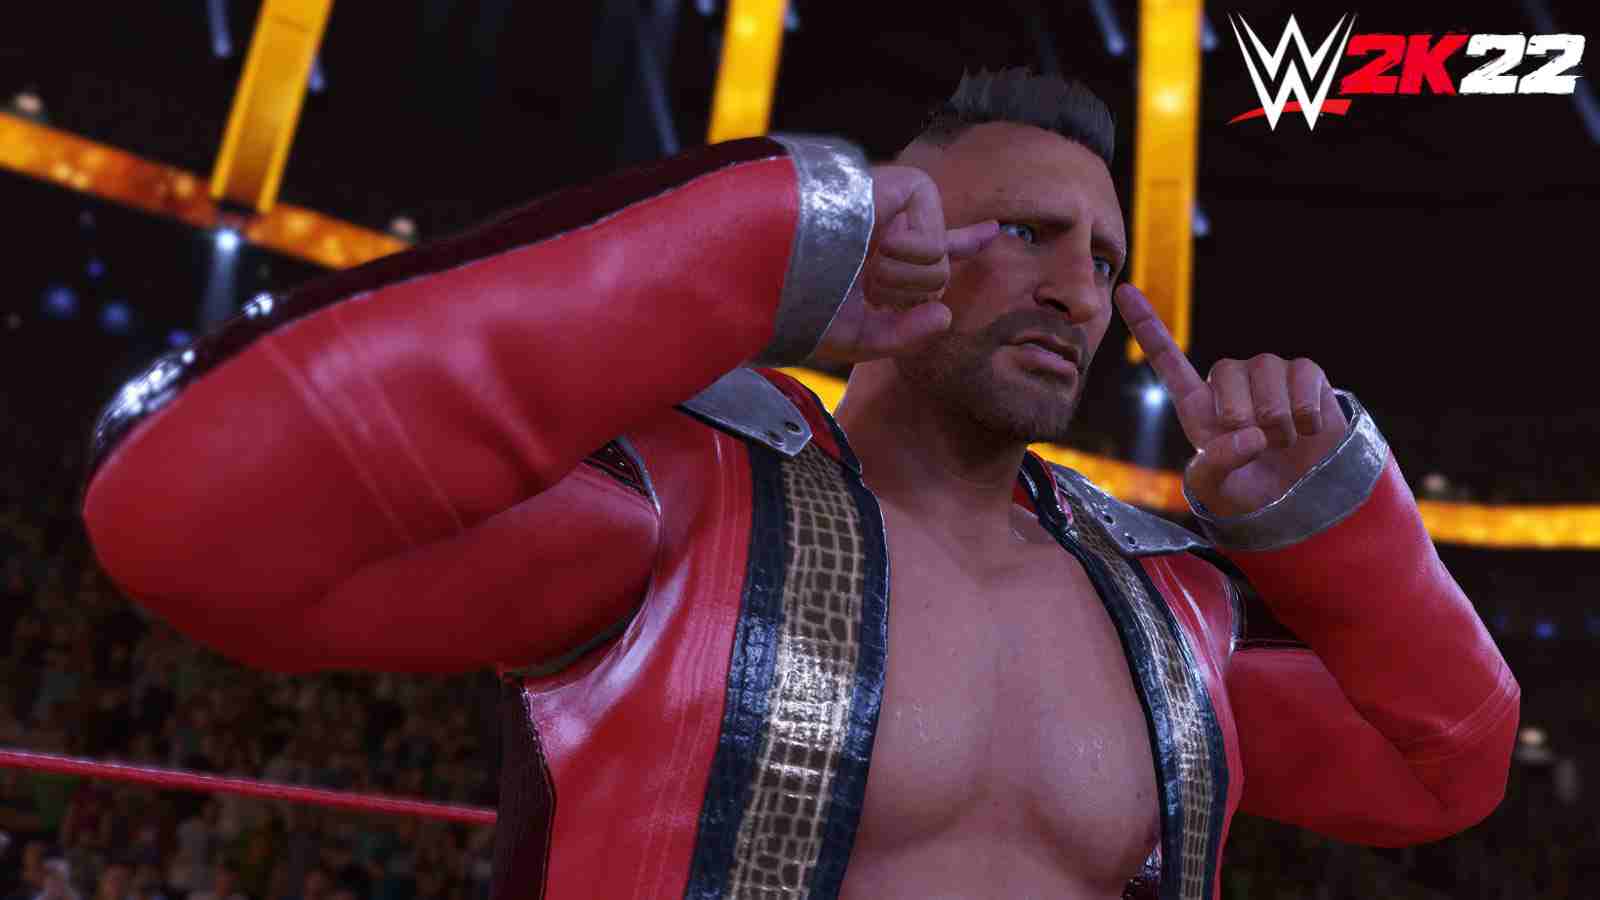 WWE 2K22 Update 1.12 Patch Notes - May 16, 2022